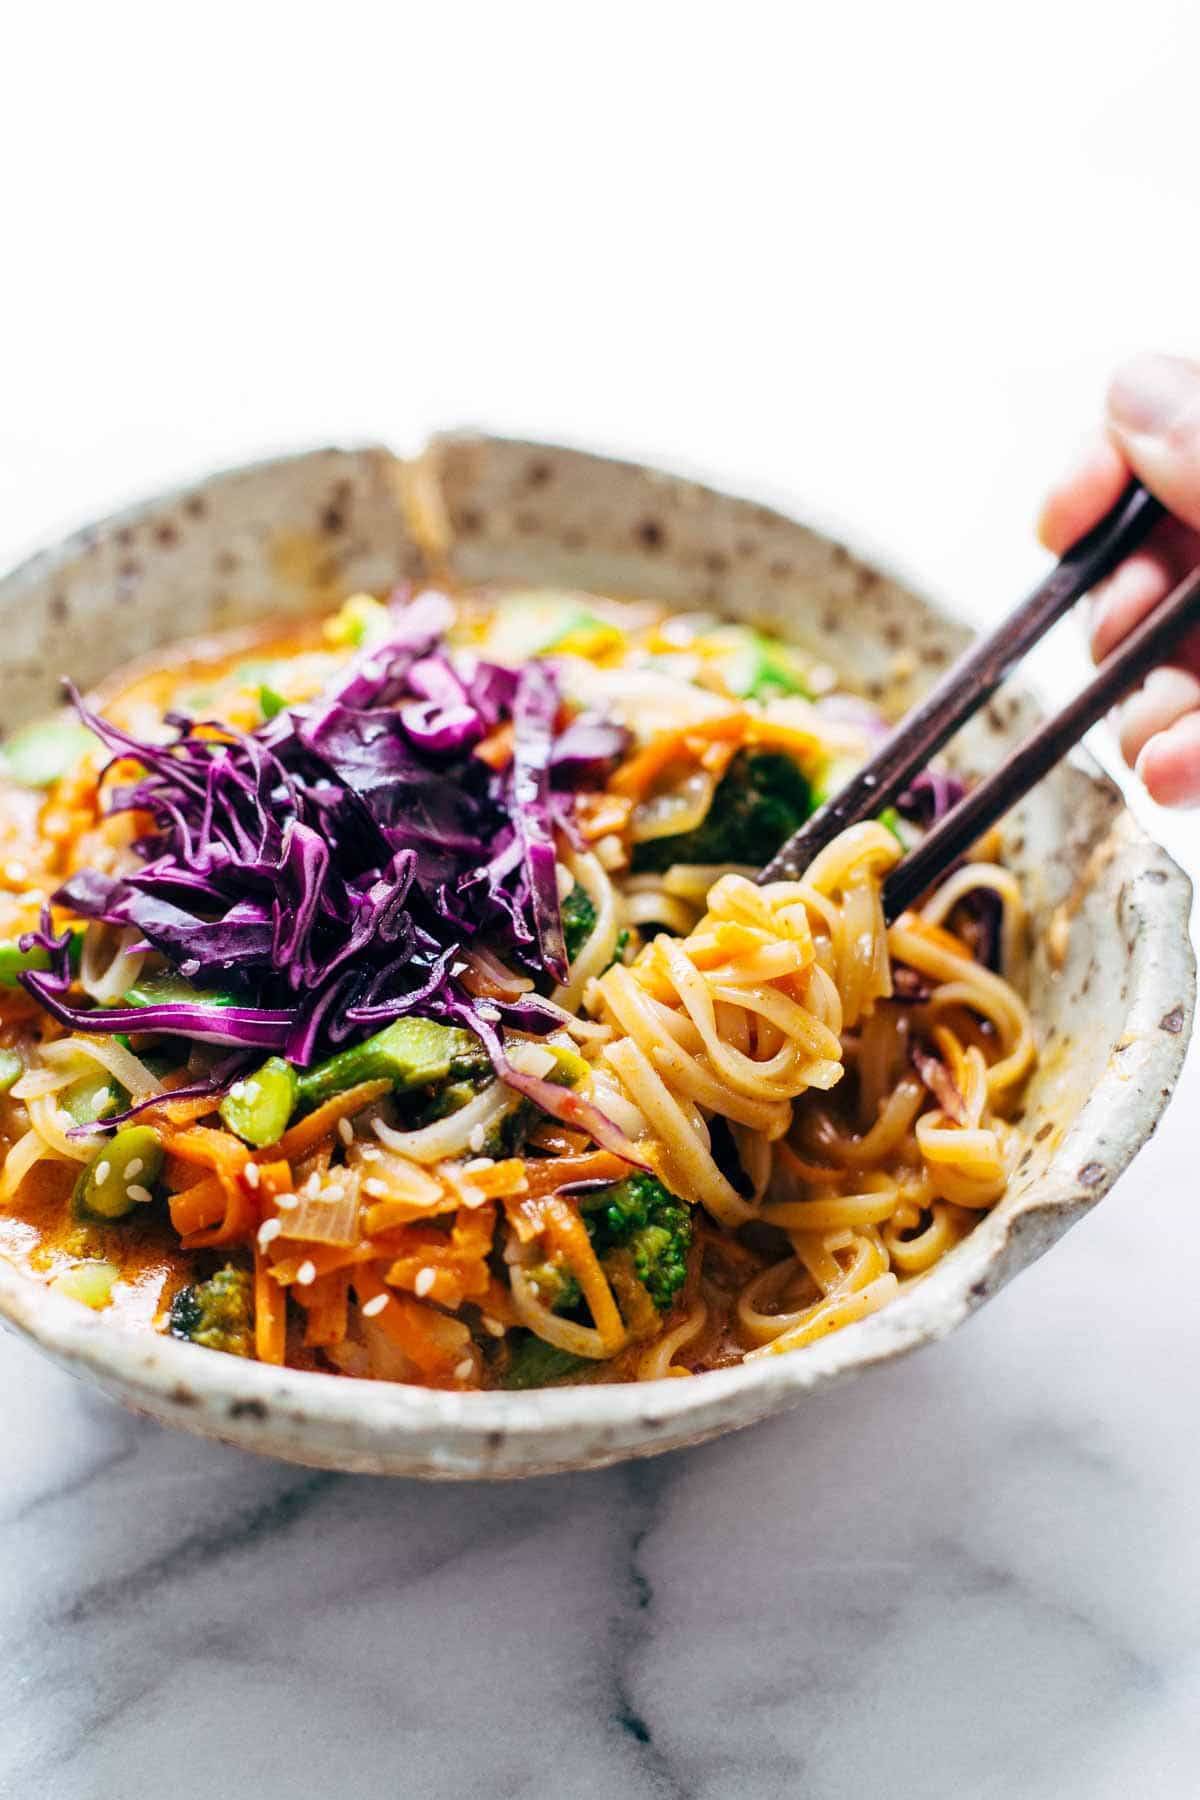 These Bangkok Coconut Curry Noodle Bowls with brown rice noodles are healthy and easy - can be made vegetarian, vegan, or gluten free! | pinchofyum.com